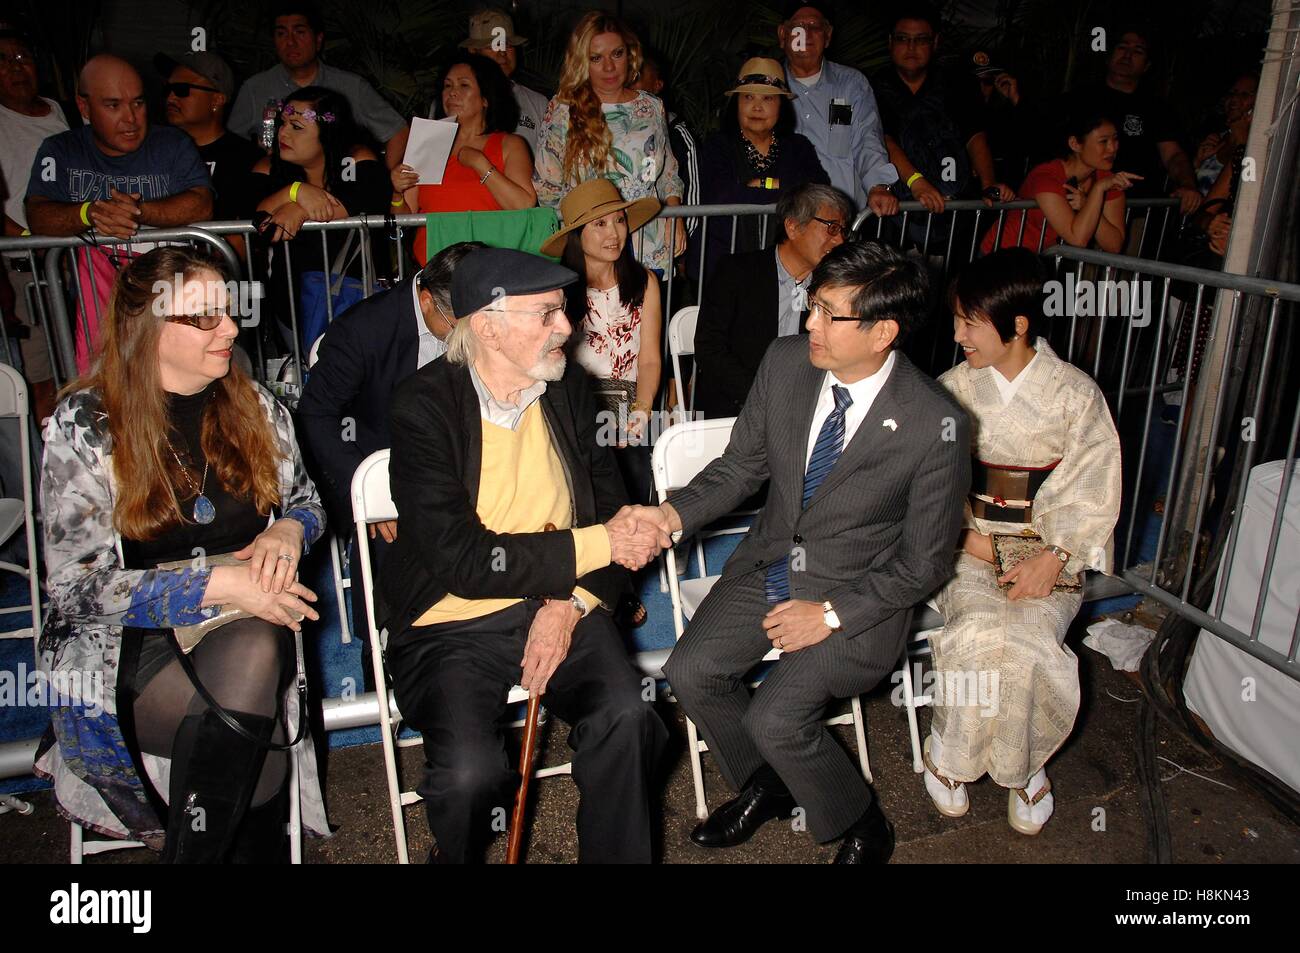 Los Angeles, CA, USA. 14th Nov, 2016. Susan Landau Finch, Martin Landau, Akira Chiba at the induction ceremony for Posthumous Star on the Hollywood Walk of Fame for Toshiro Mifune, Hollywood Boulevard, Los Angeles, CA November 14, 2016. Credit:  Michael Germana/Everett Collection/Alamy Live News Stock Photo